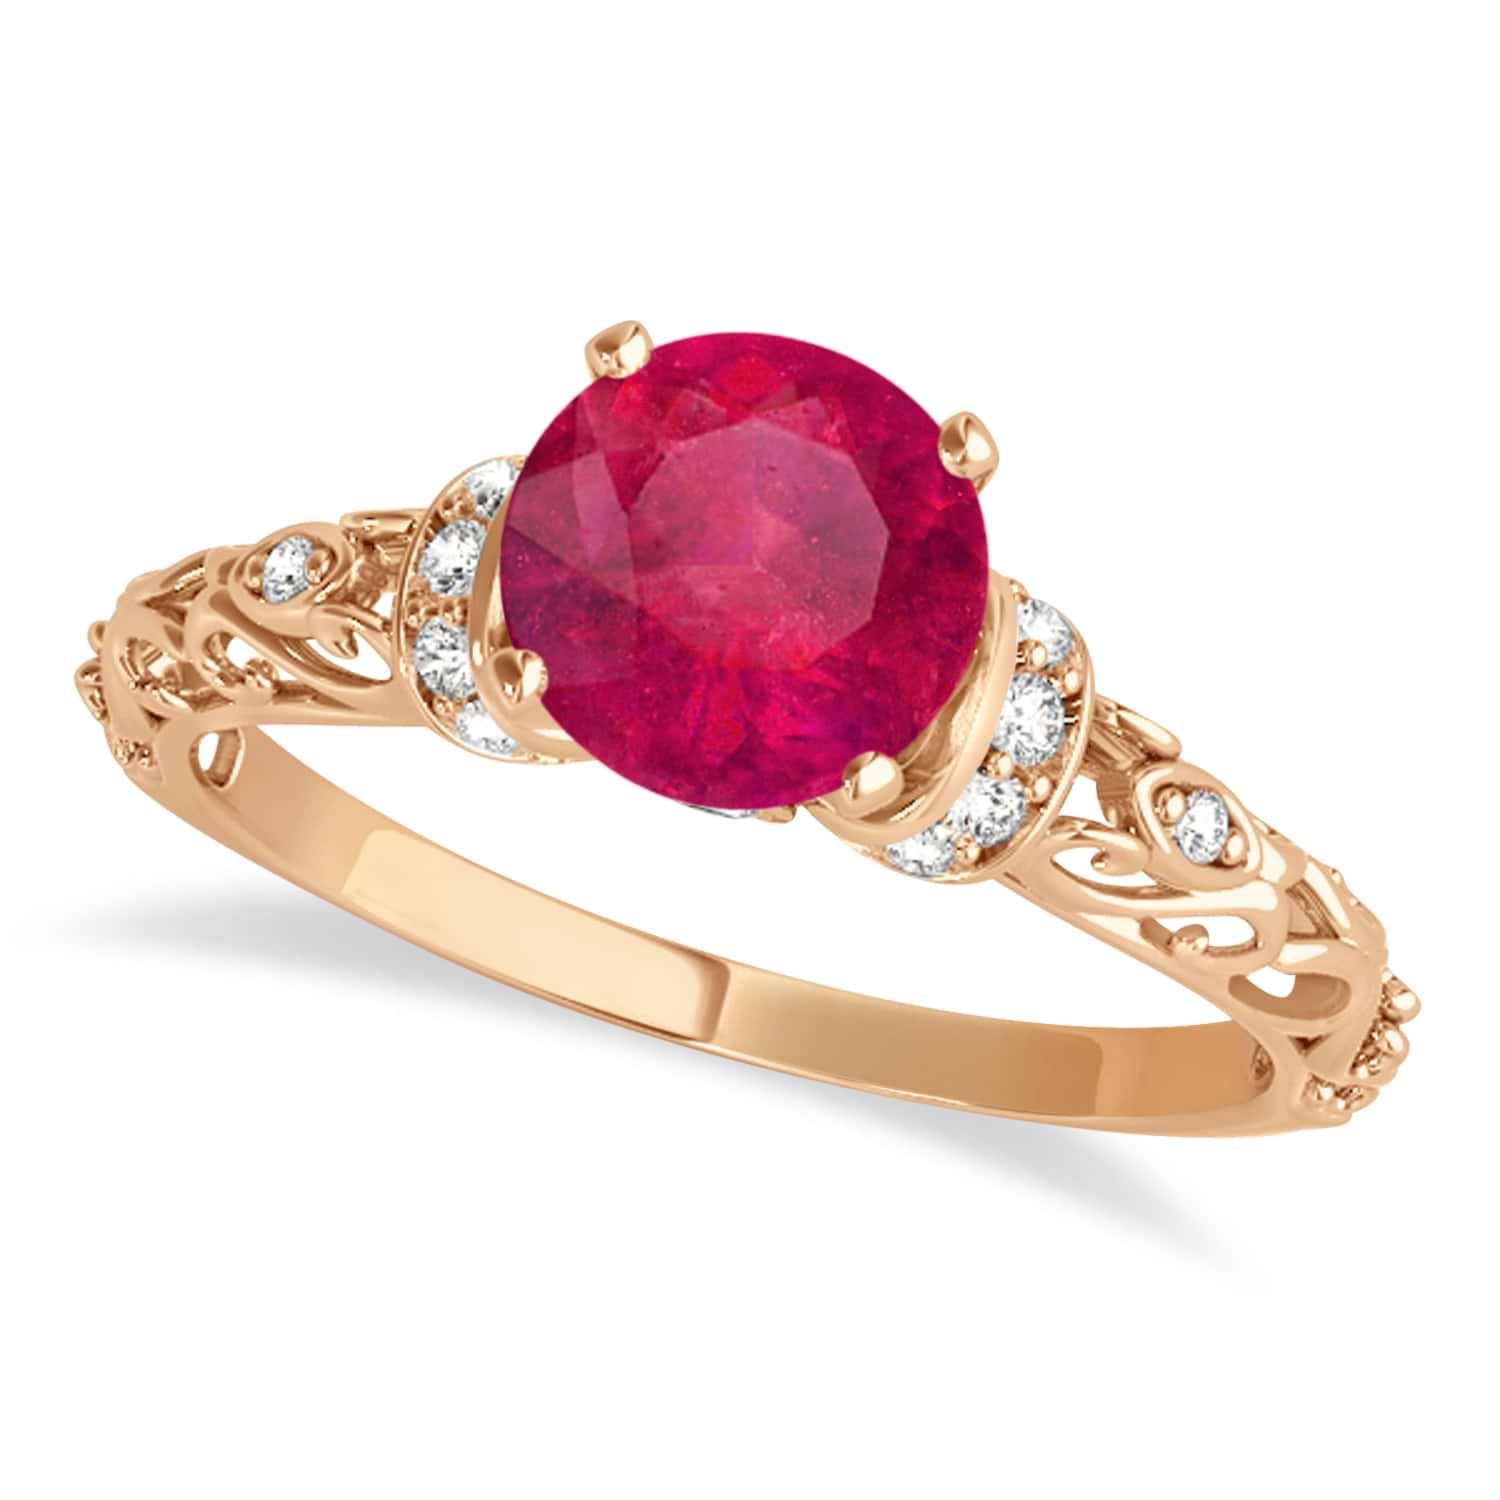 Ruby & Diamond Antique Style Engagement Ring 14k Rose Gold (0.87ct)